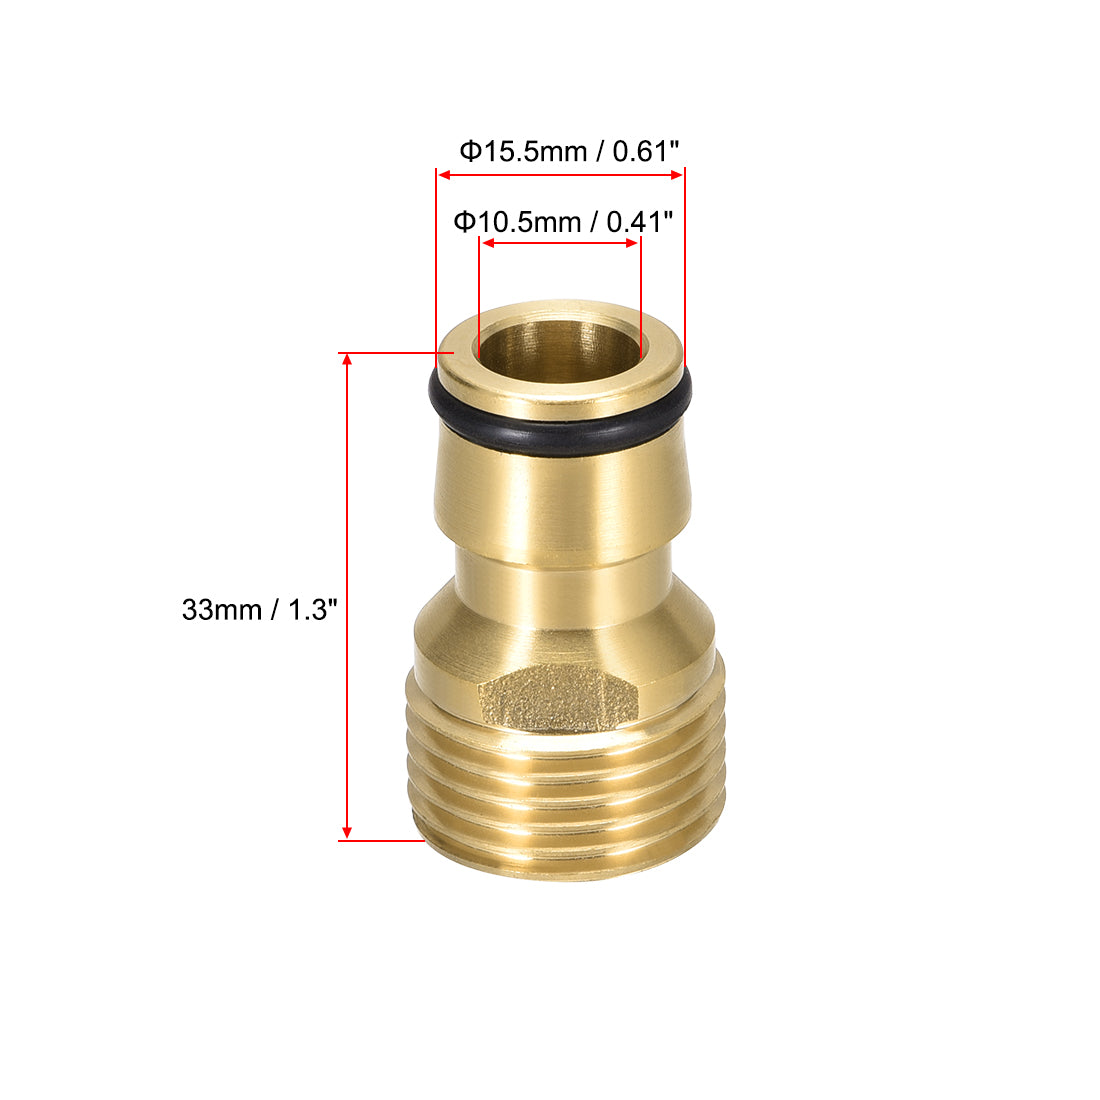 uxcell Uxcell Brass Faucet Tap Quick Connector G1/2 Male Thread Hose Pipe Socket Adapter 2pcs